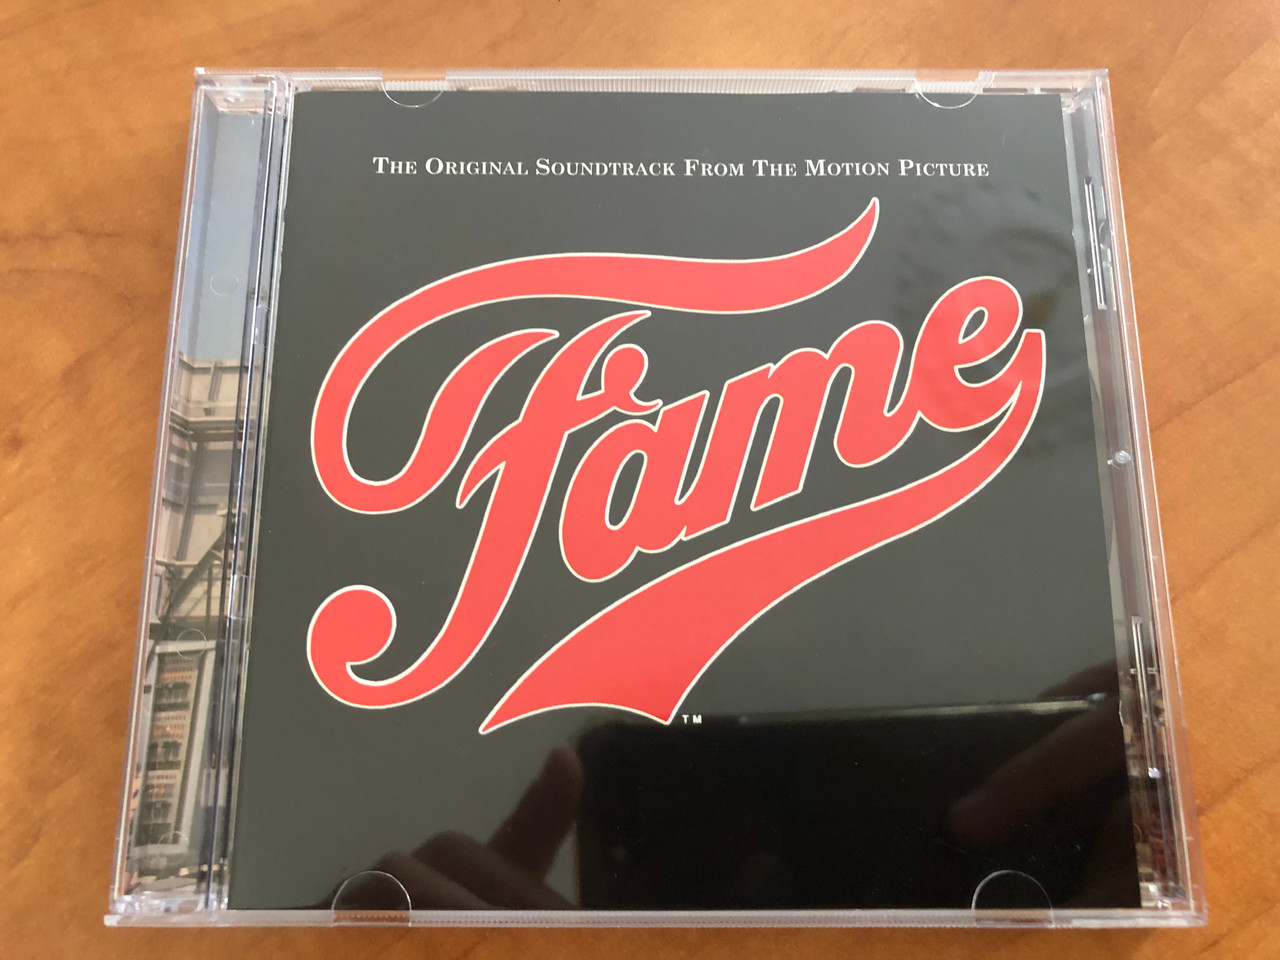 https://cdn10.bigcommerce.com/s-62bdpkt7pb/products/30787/images/181766/Fame_The_Original_Soundtrack_From_The_Motion_Picture_TCM_Turner_Classic_Movies_MusicAudio_CD_2003_8122-73862-2_1__25991.1623837173.1280.1280.JPG?c=2&_ga=2.139078067.1829284140.1623917769-62128686.1623917769